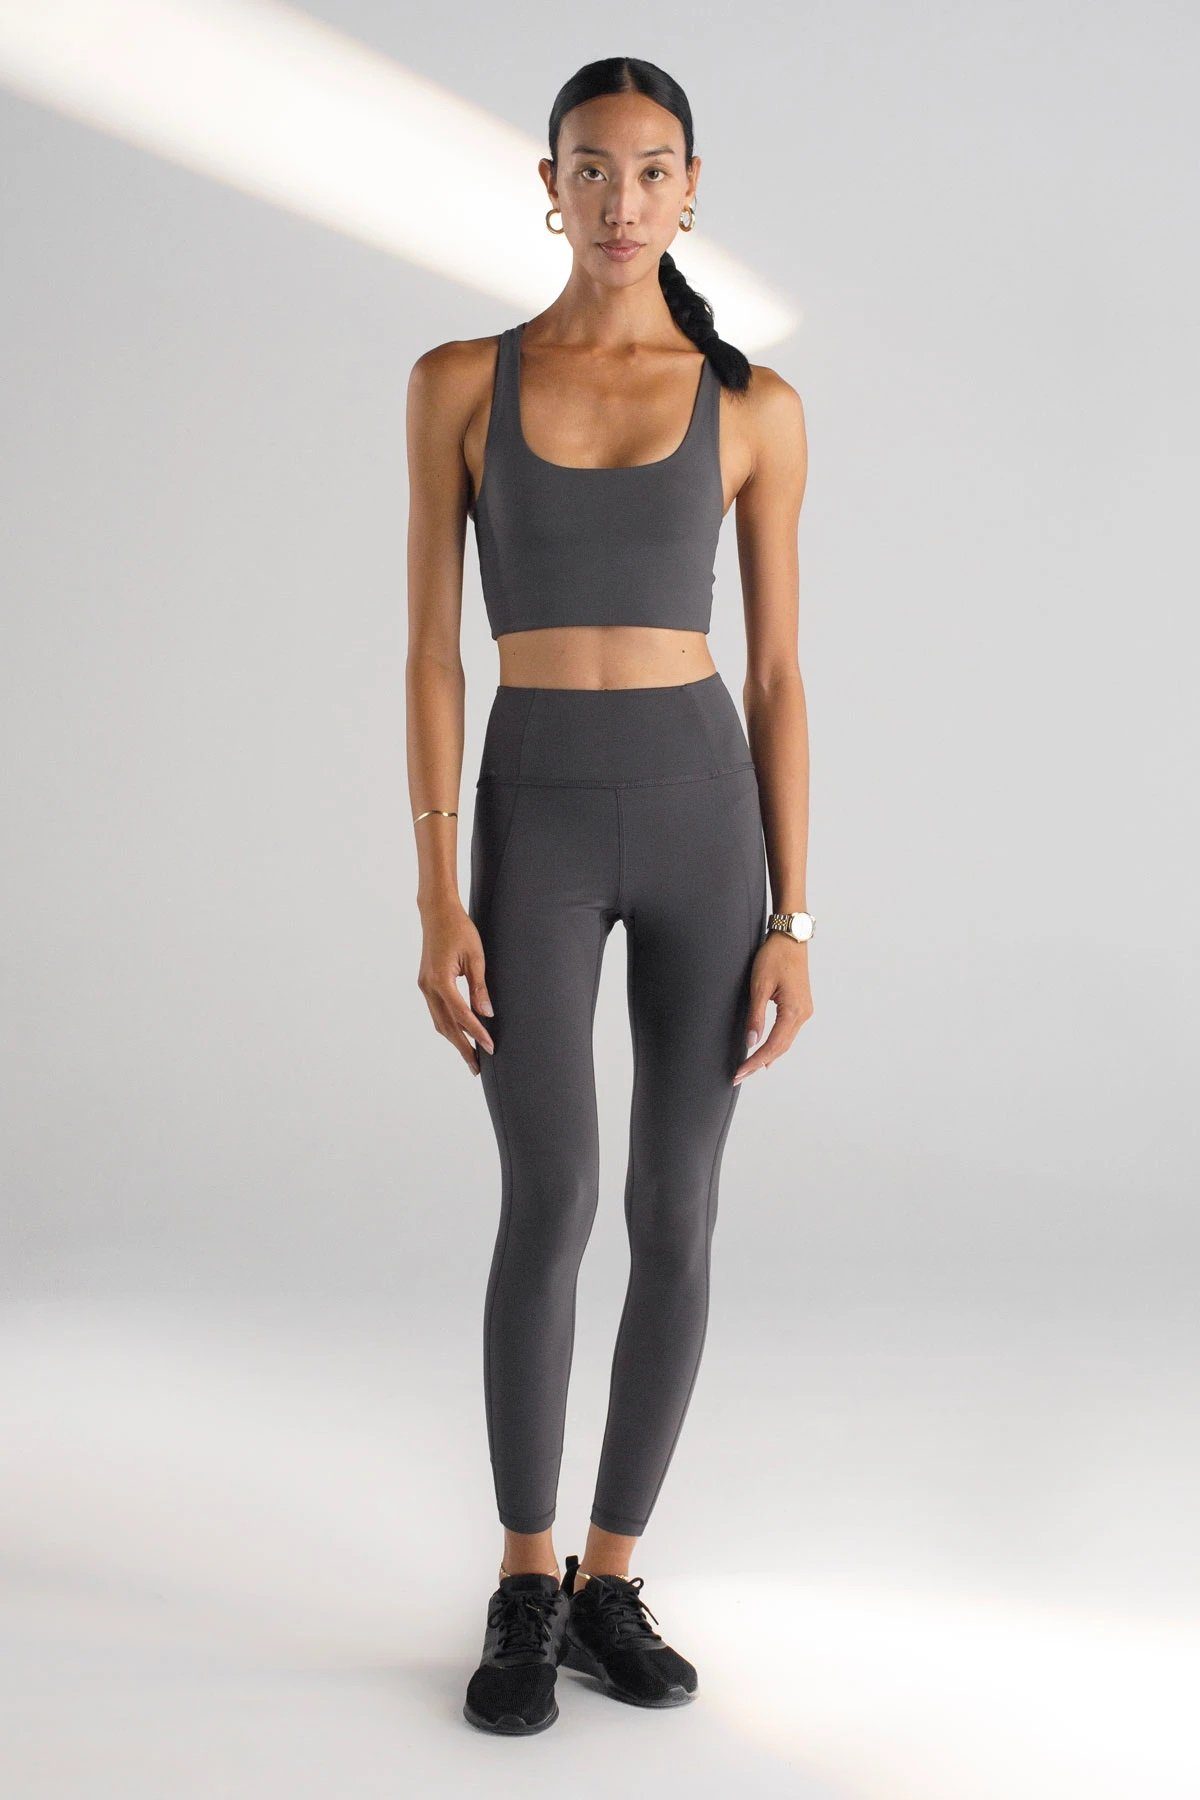 A-dam solid olive active leggings from recycled plastic bottles